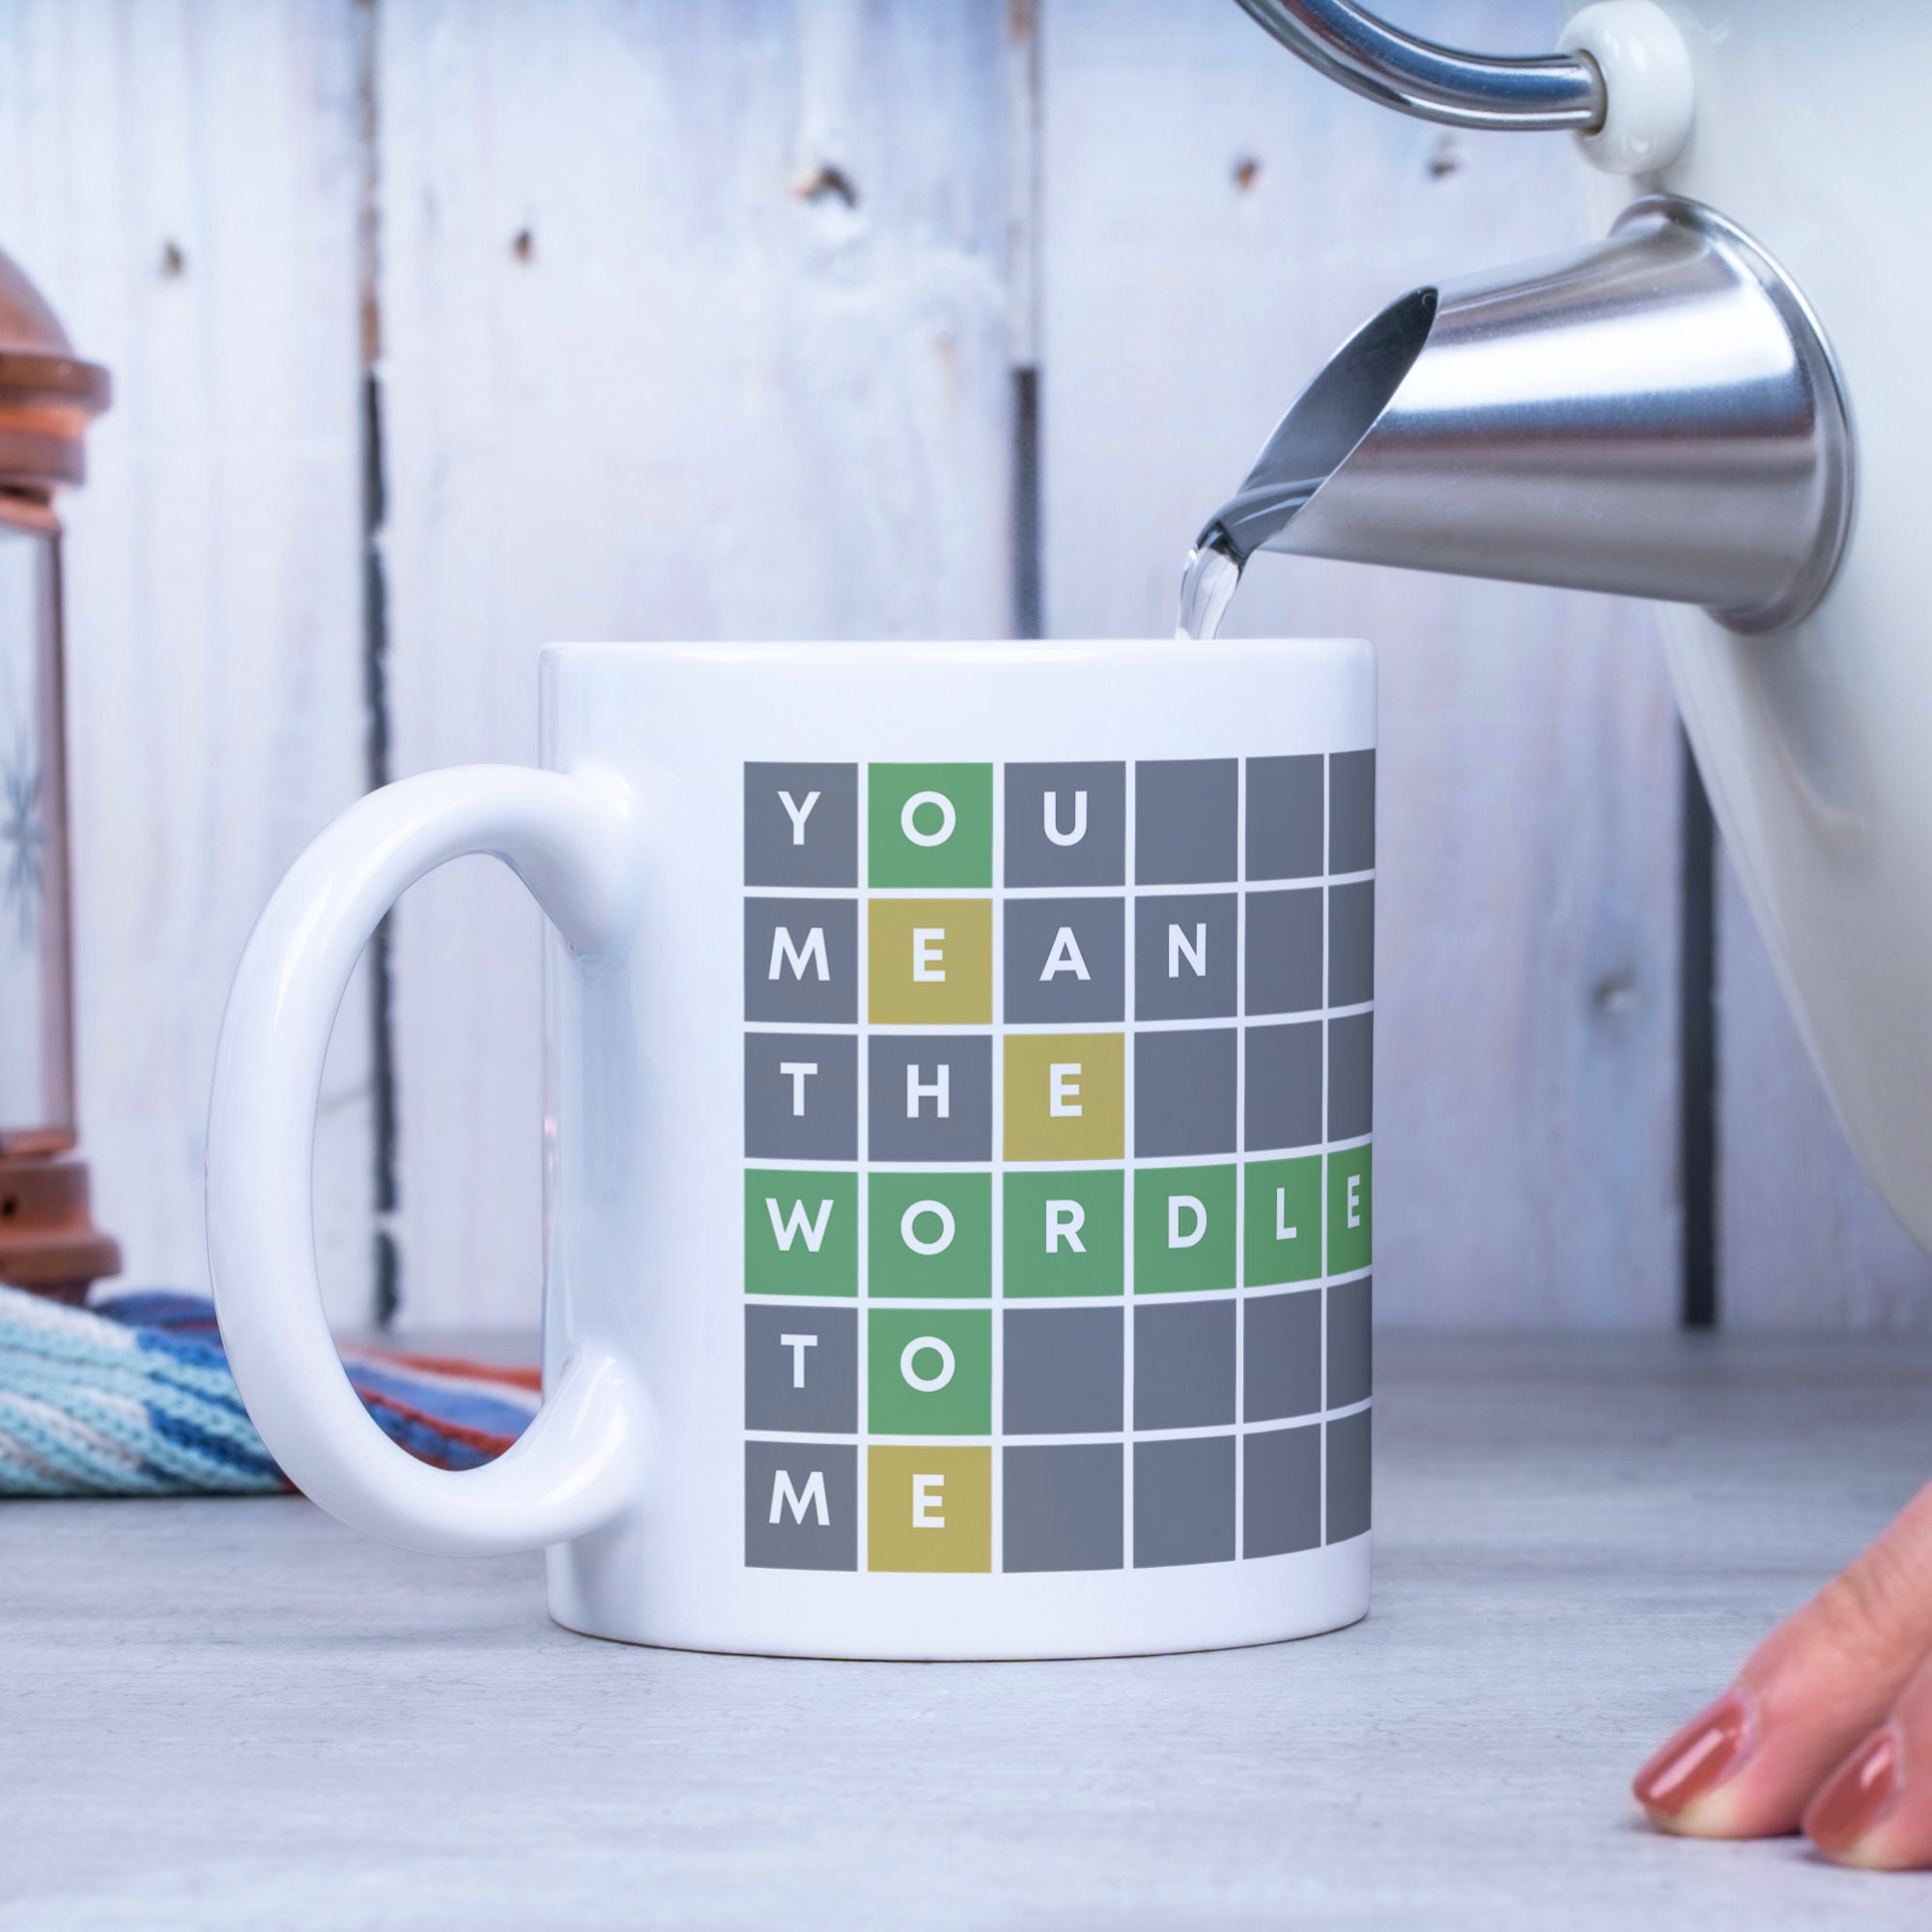 Wordle You Mean The Wordle To Me Mug – A Bit of Banter